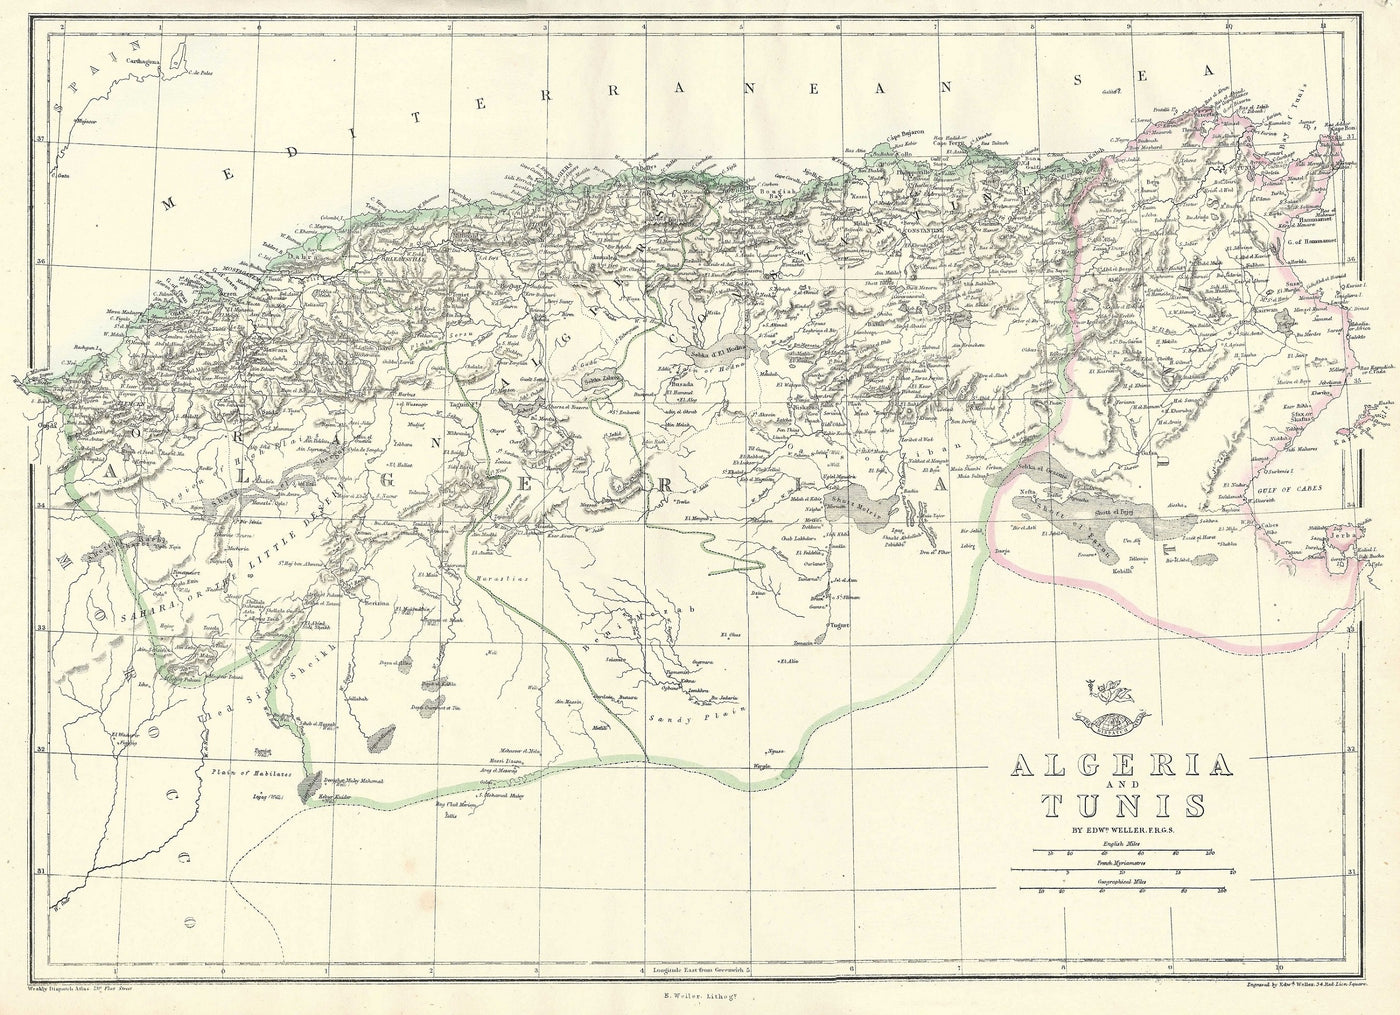 Algeria Tunisia antique map from Weekly Dispatch Atlas